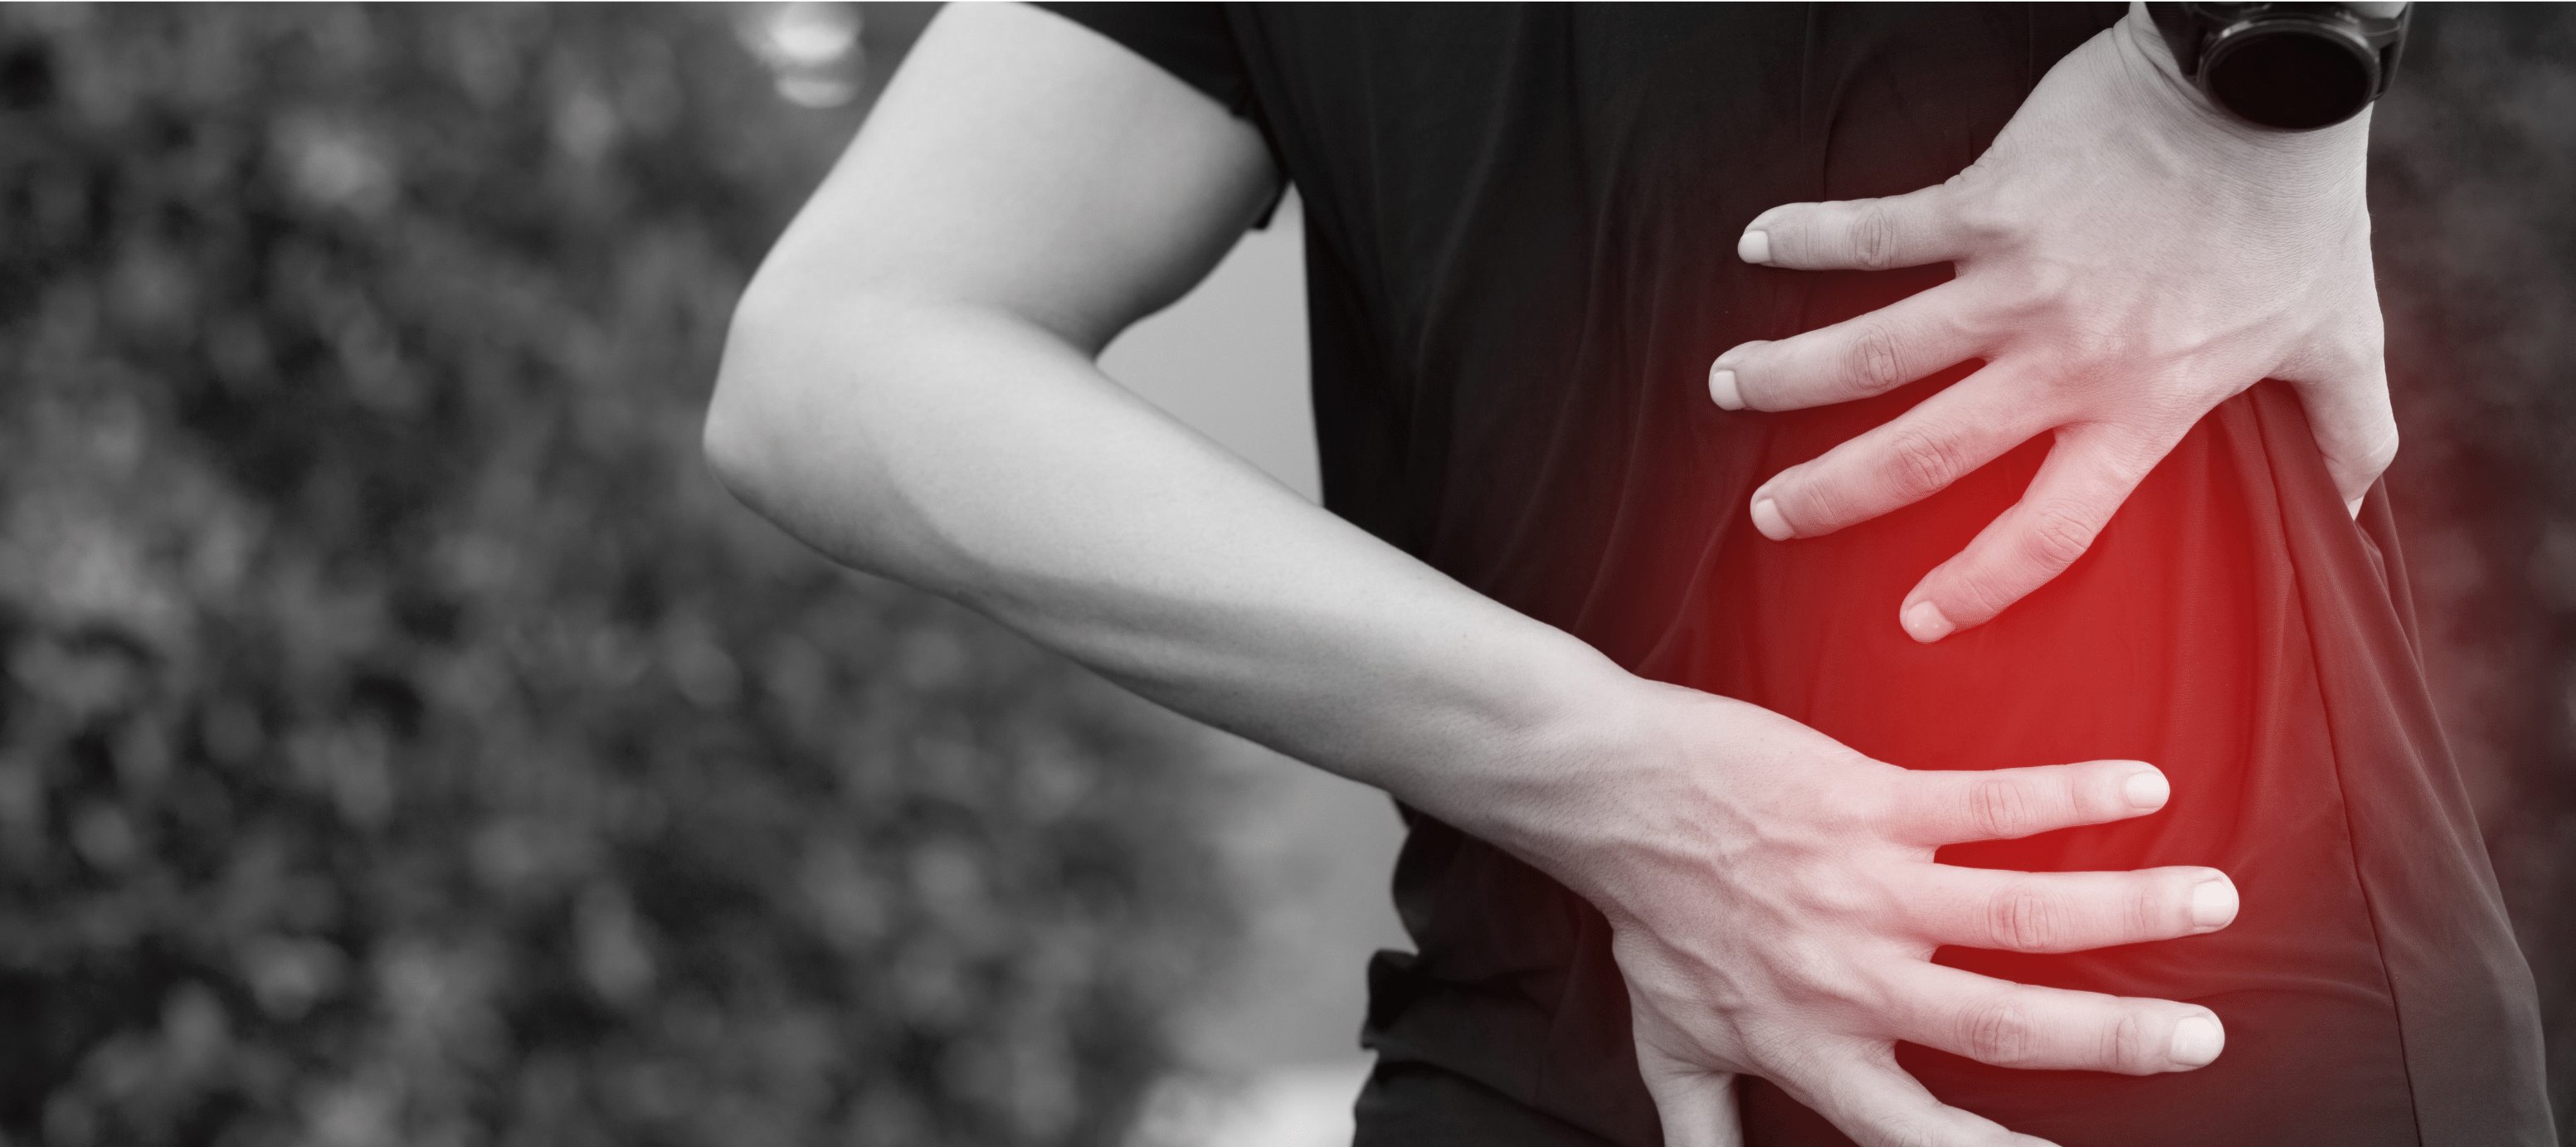 Person clutching their lower back where a glowing red indicates pain